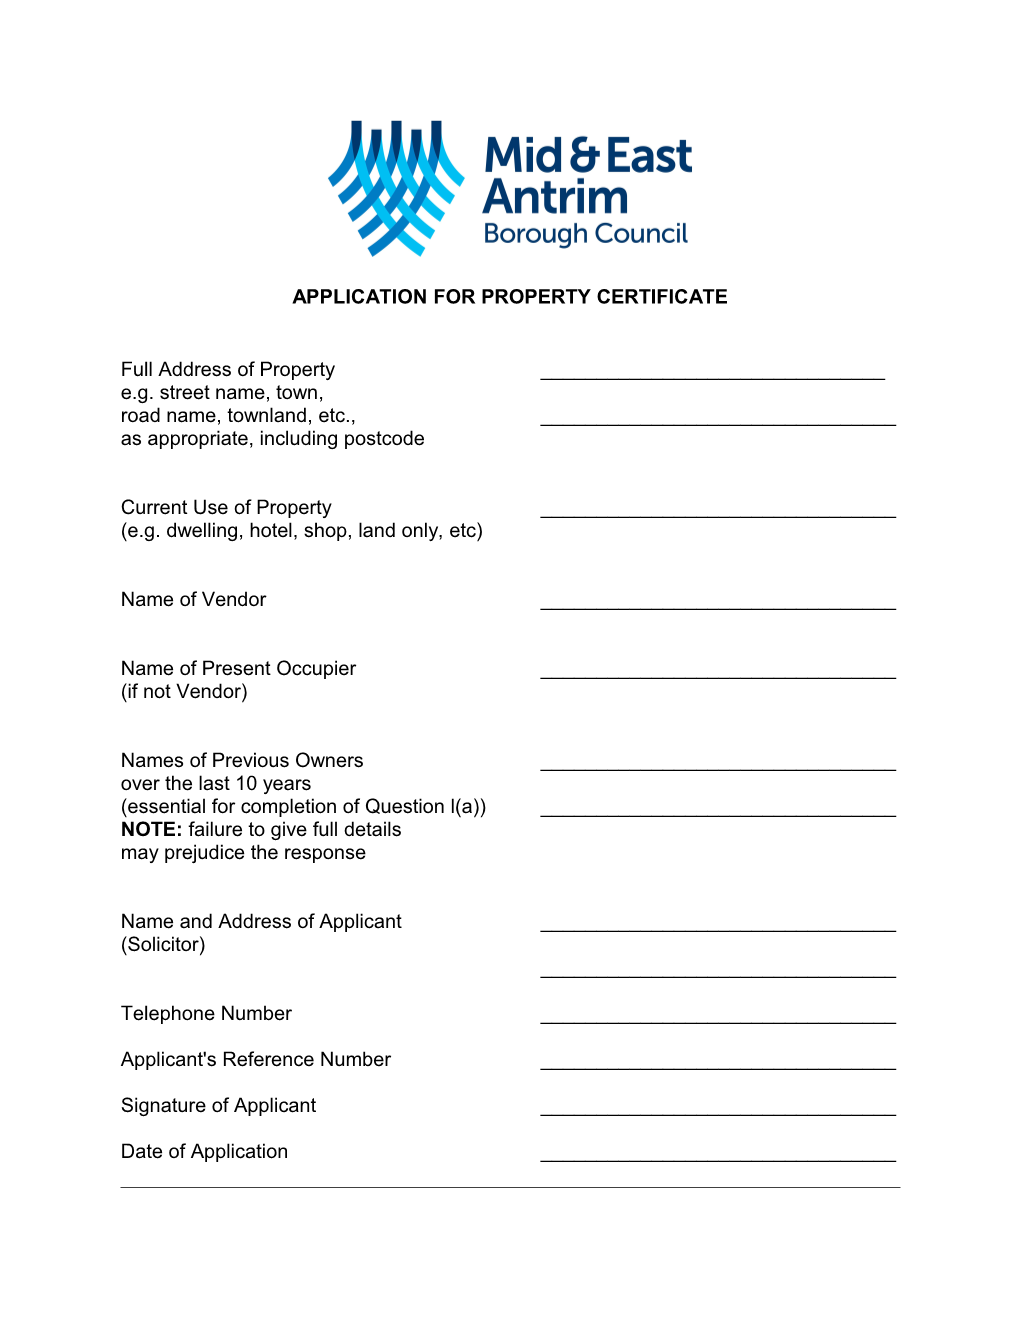 Application for Property Certificate